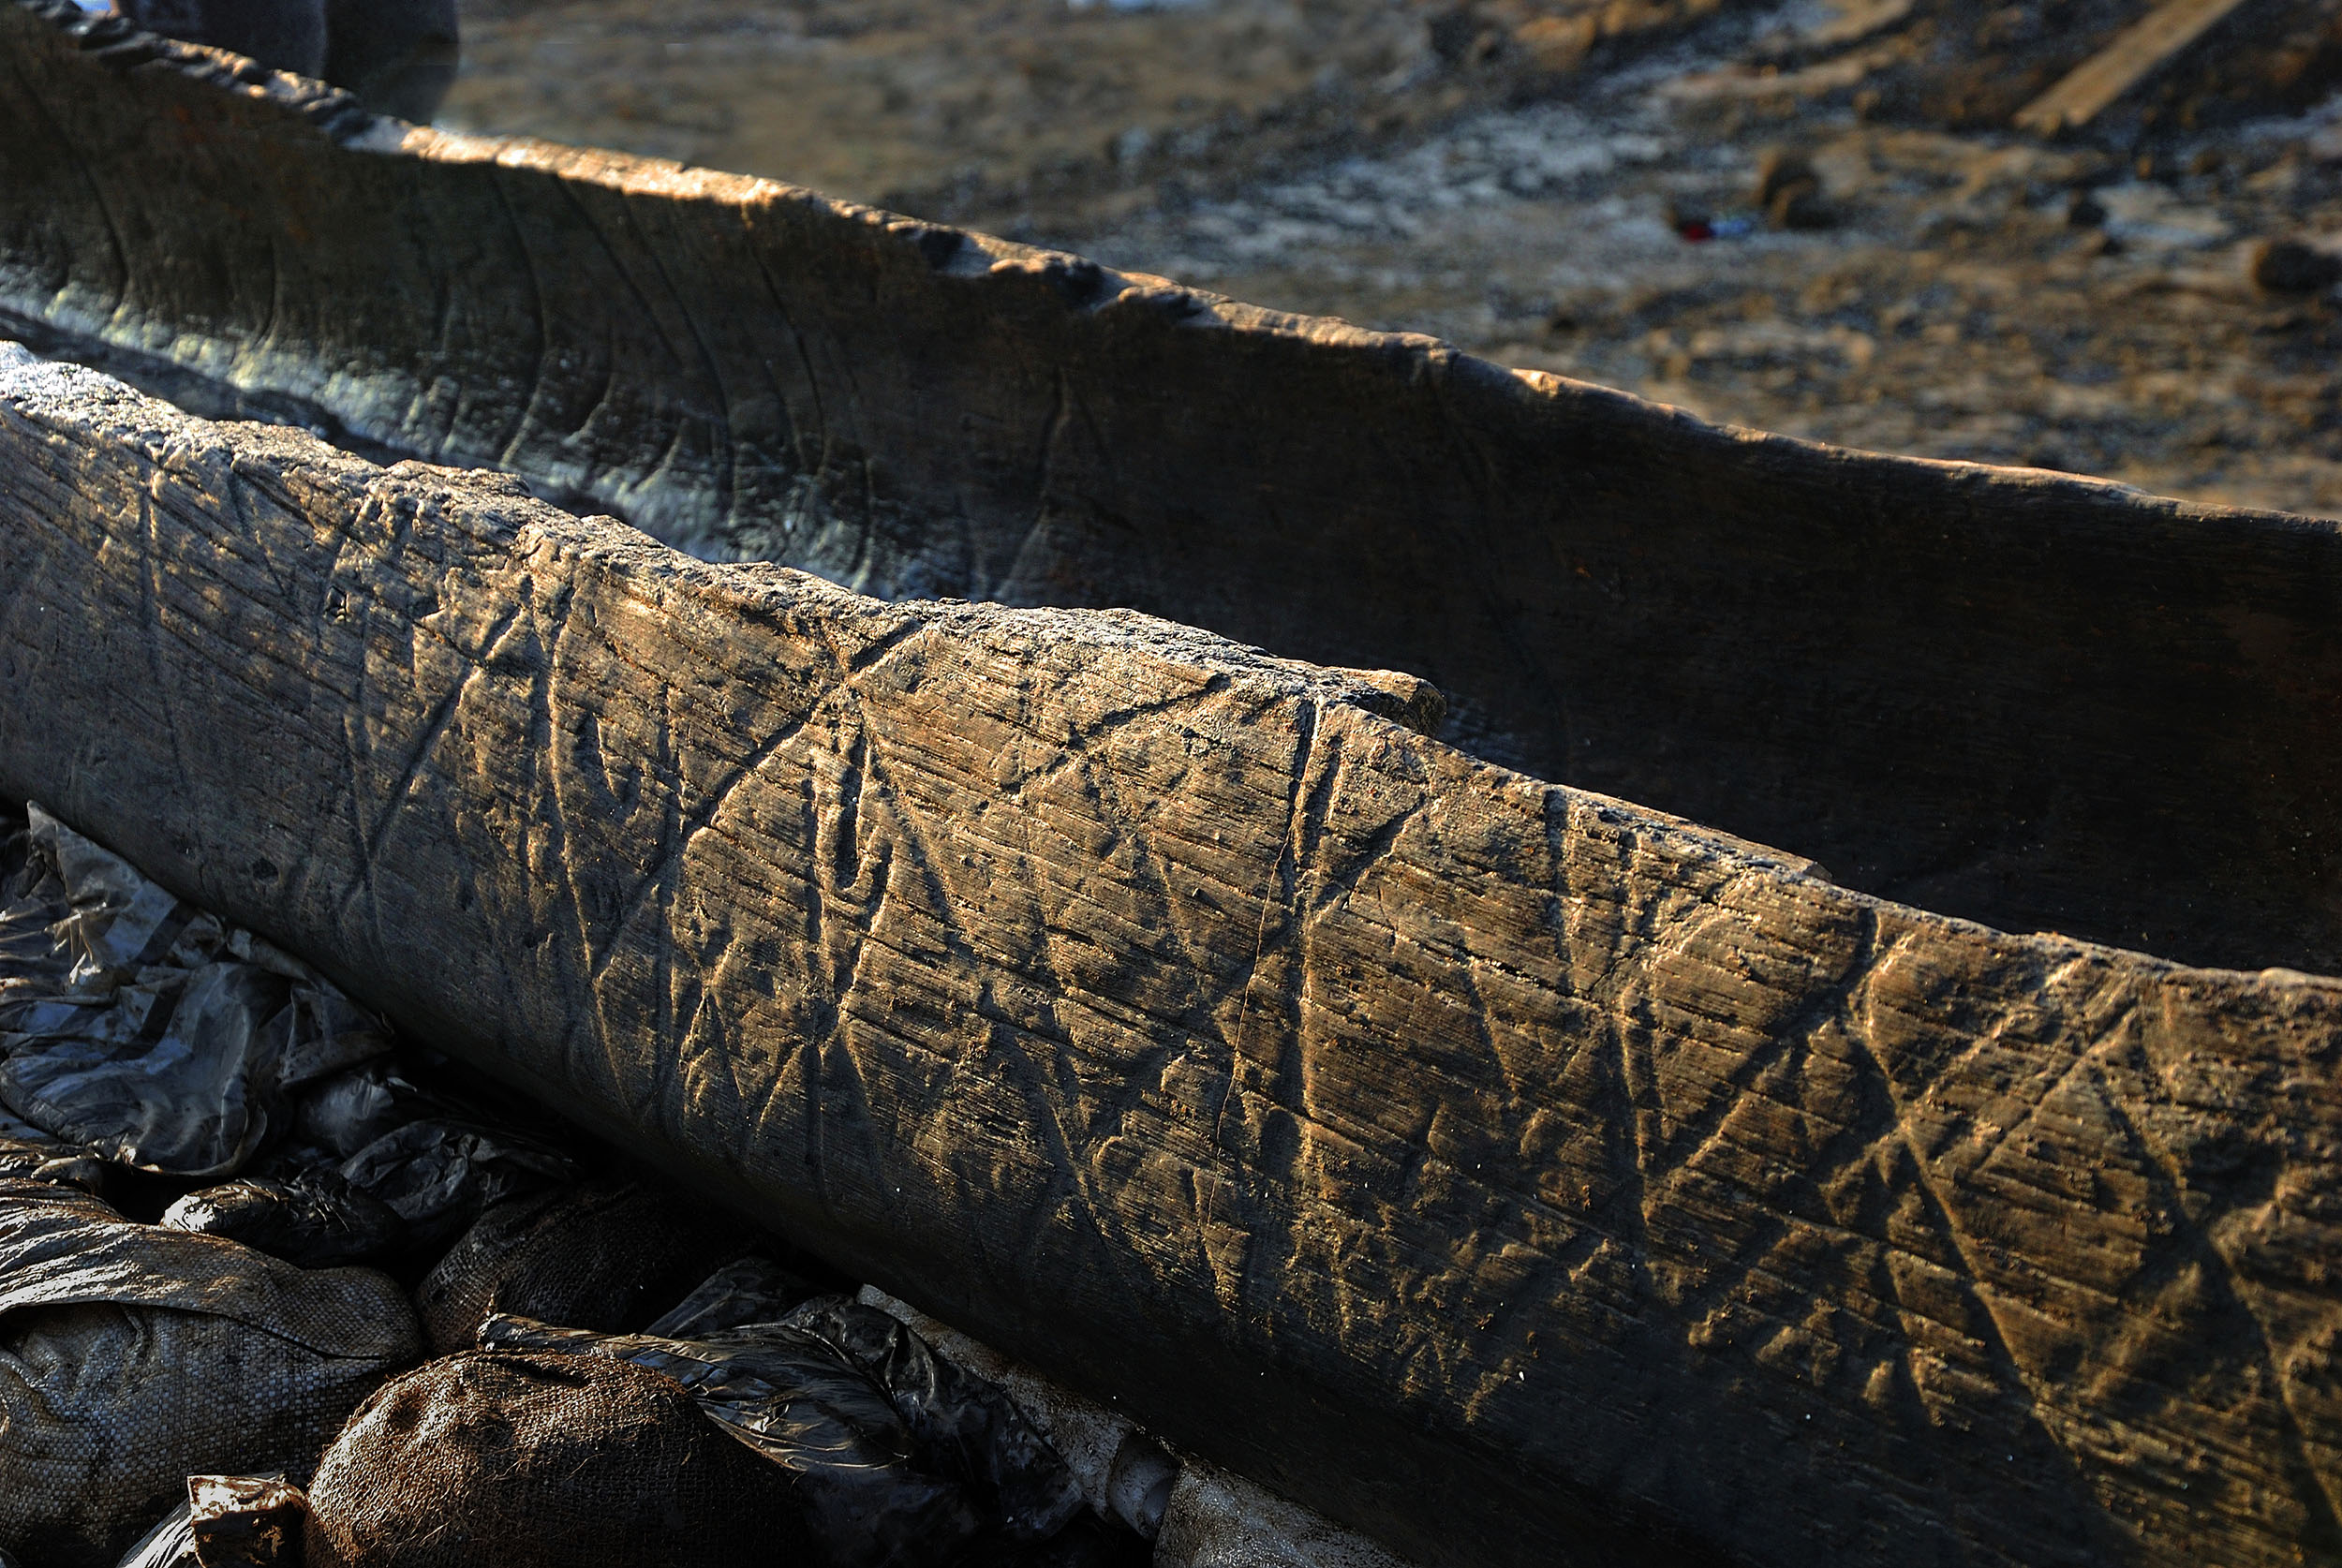 Detail of Boat 1, showing diagonal grooved markings on the interior and exterior of the 6.3m oak logboat which was excavated in 2011–12. This boat, which dates to the Early Iron Age, was found in the Must Farm palaeochannel c. 250m upstream of the location of the current timber platform investigation.